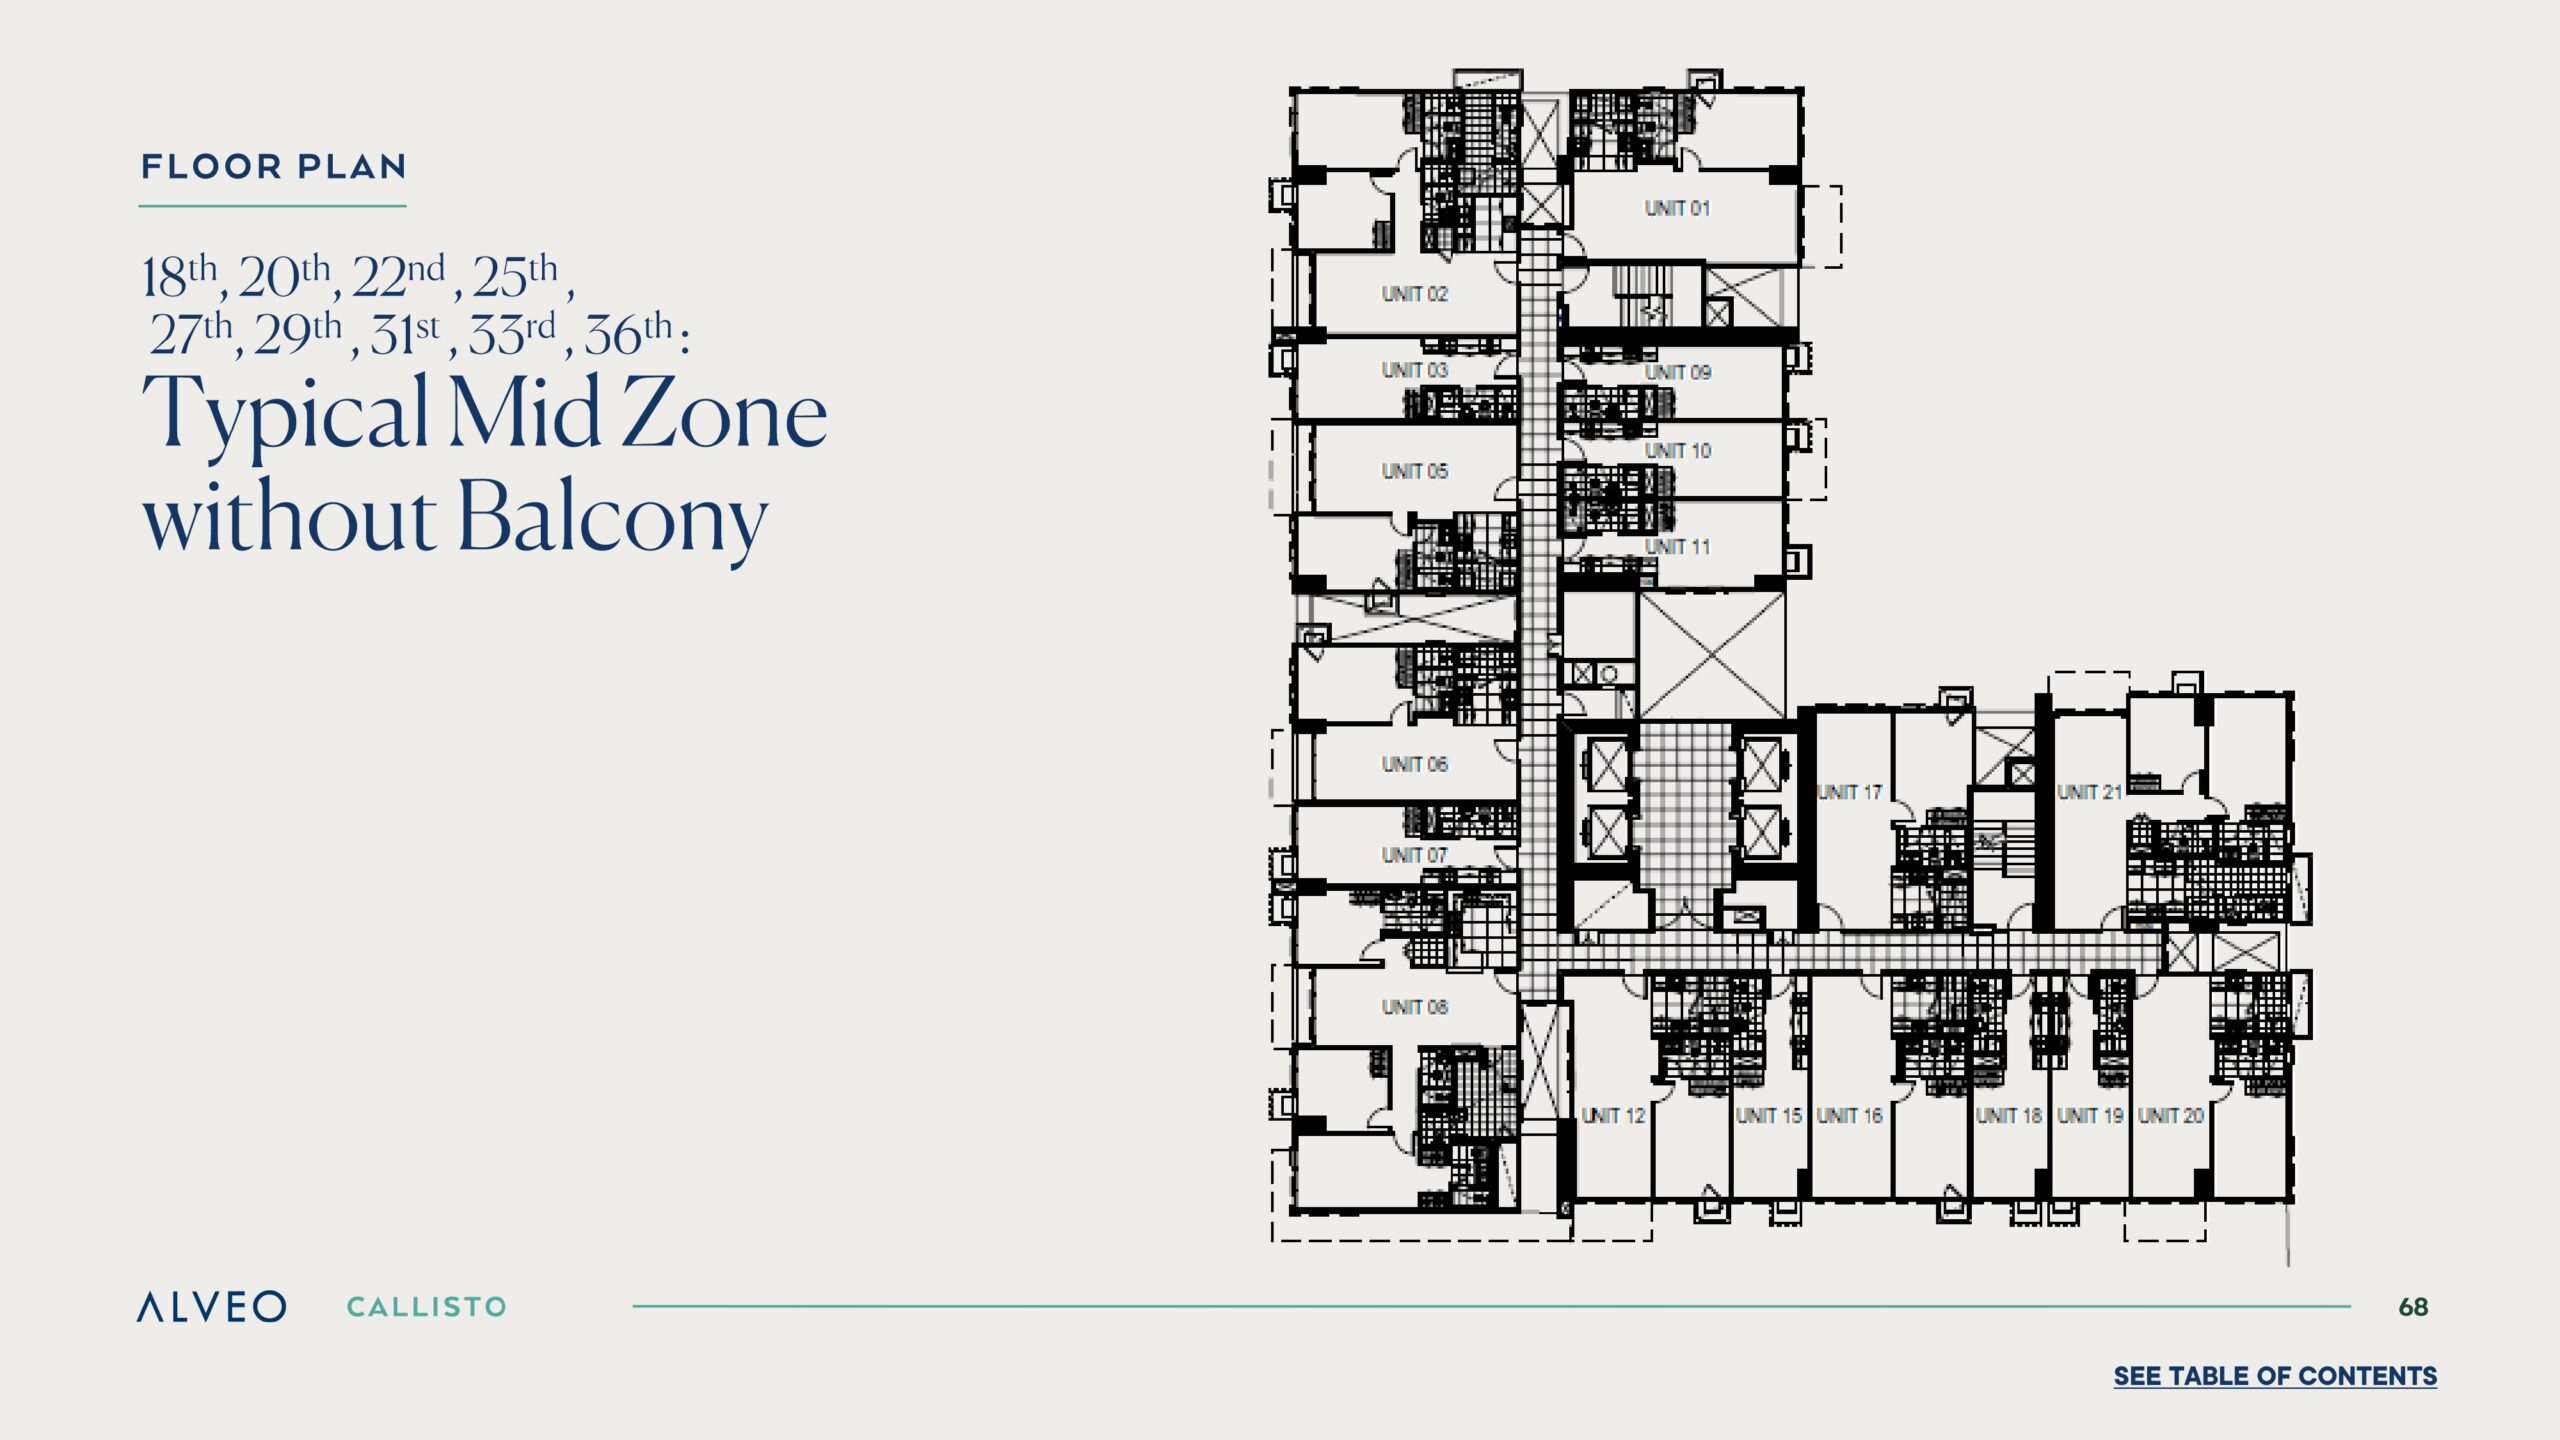 Typical Mid Zone without Balcony